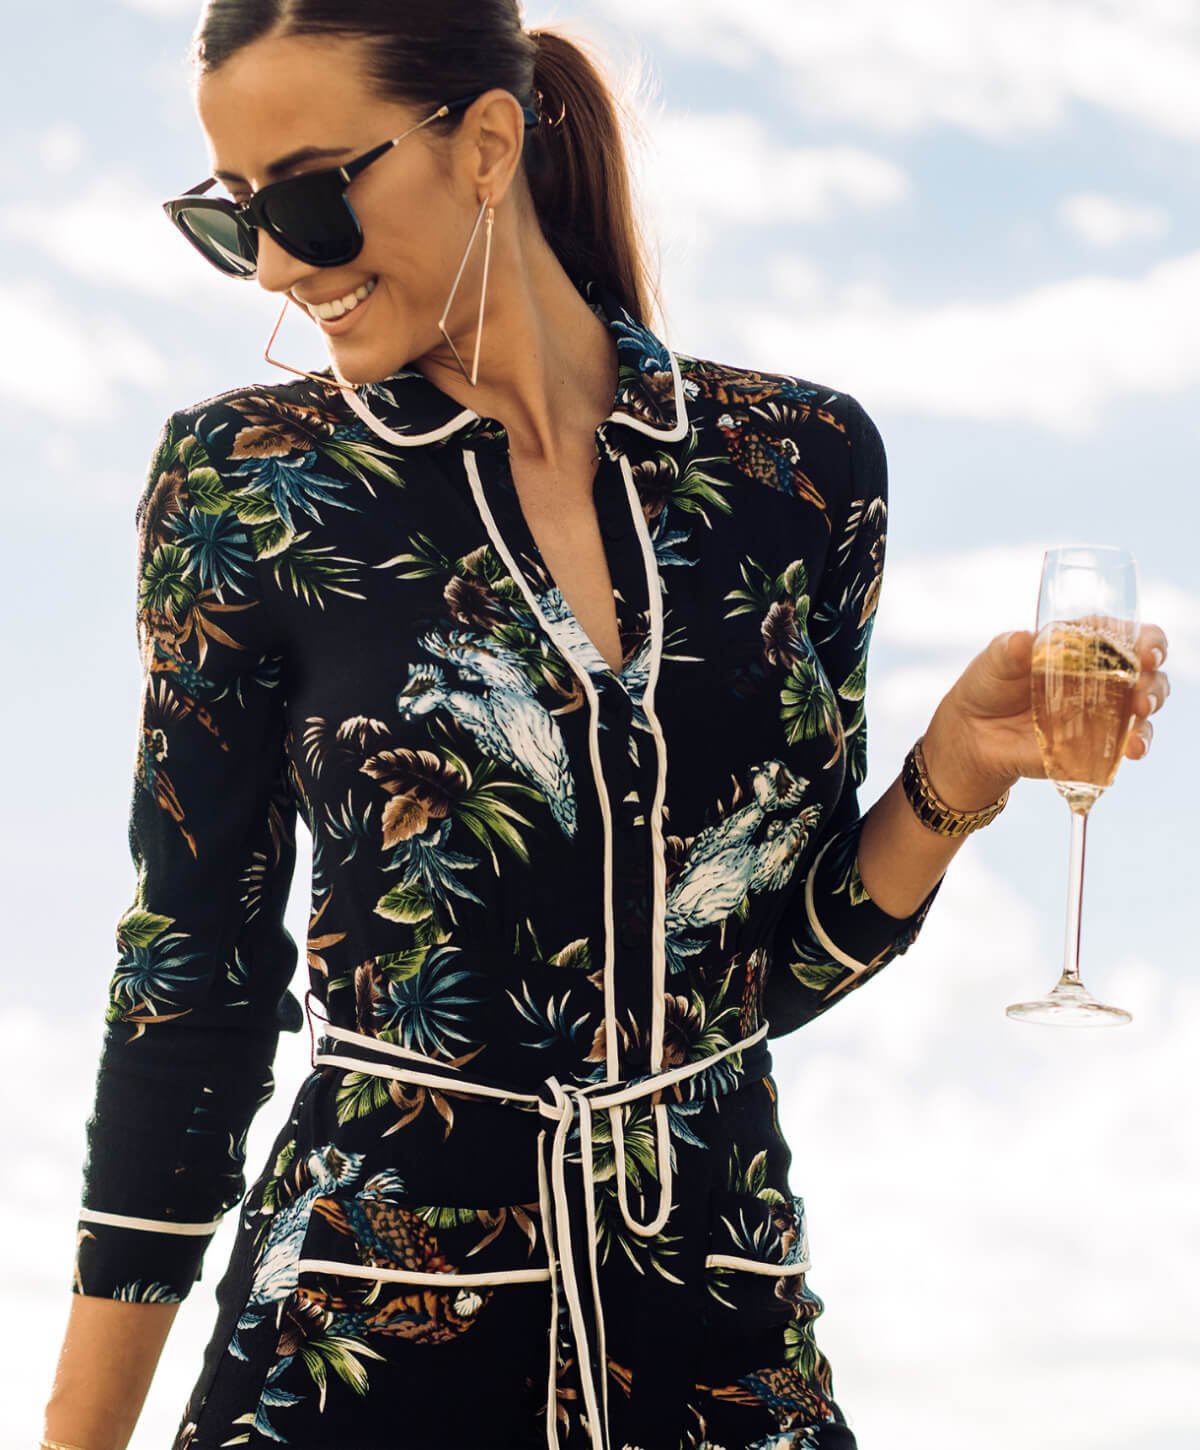 Liposuction patient model in a fashionable outfit holding a glass of wine